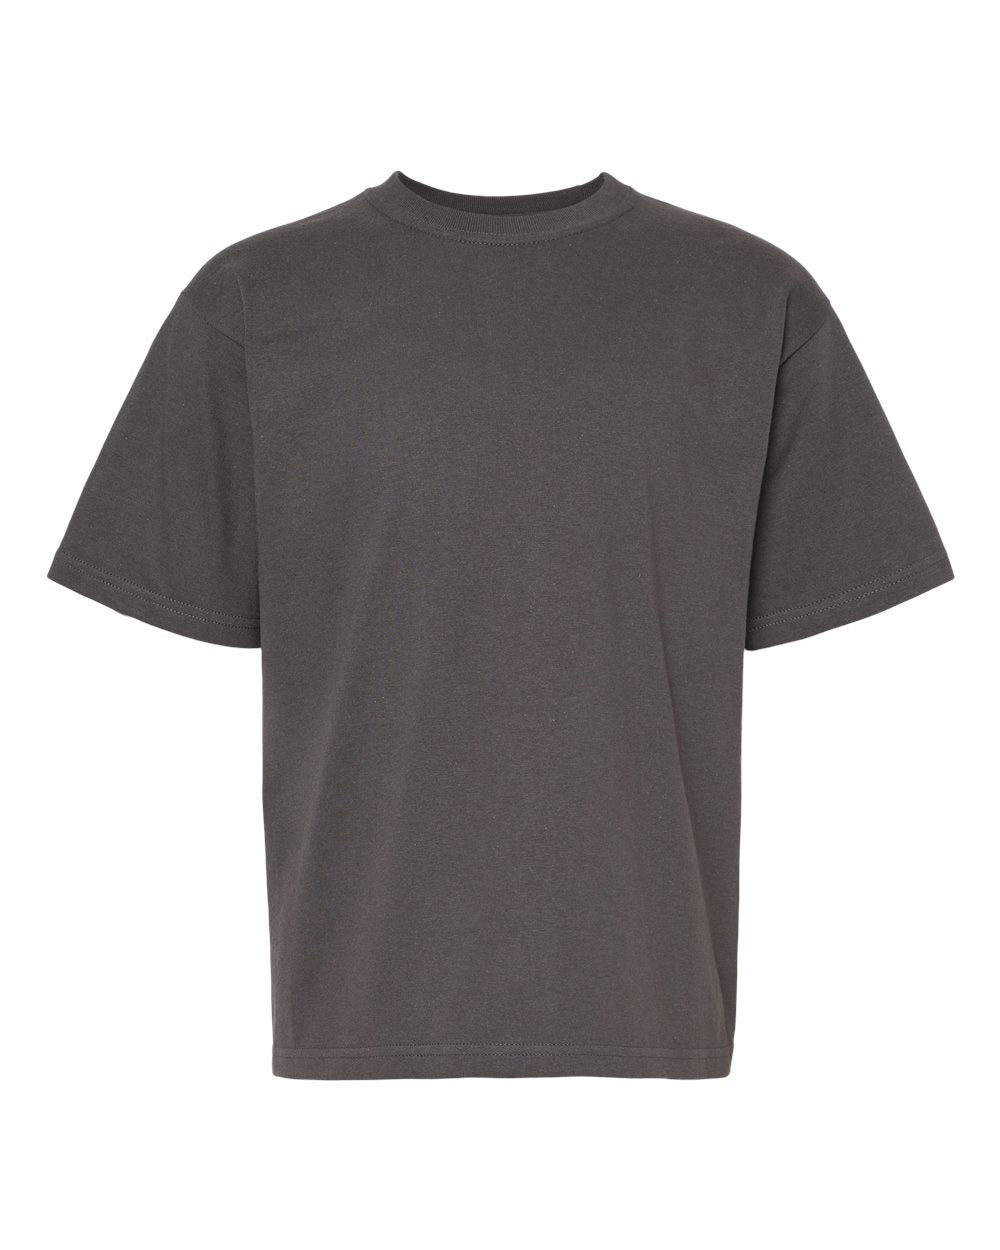 M&O Youth Gold Soft Touch T-Shirt 4850 #color_Charcoal